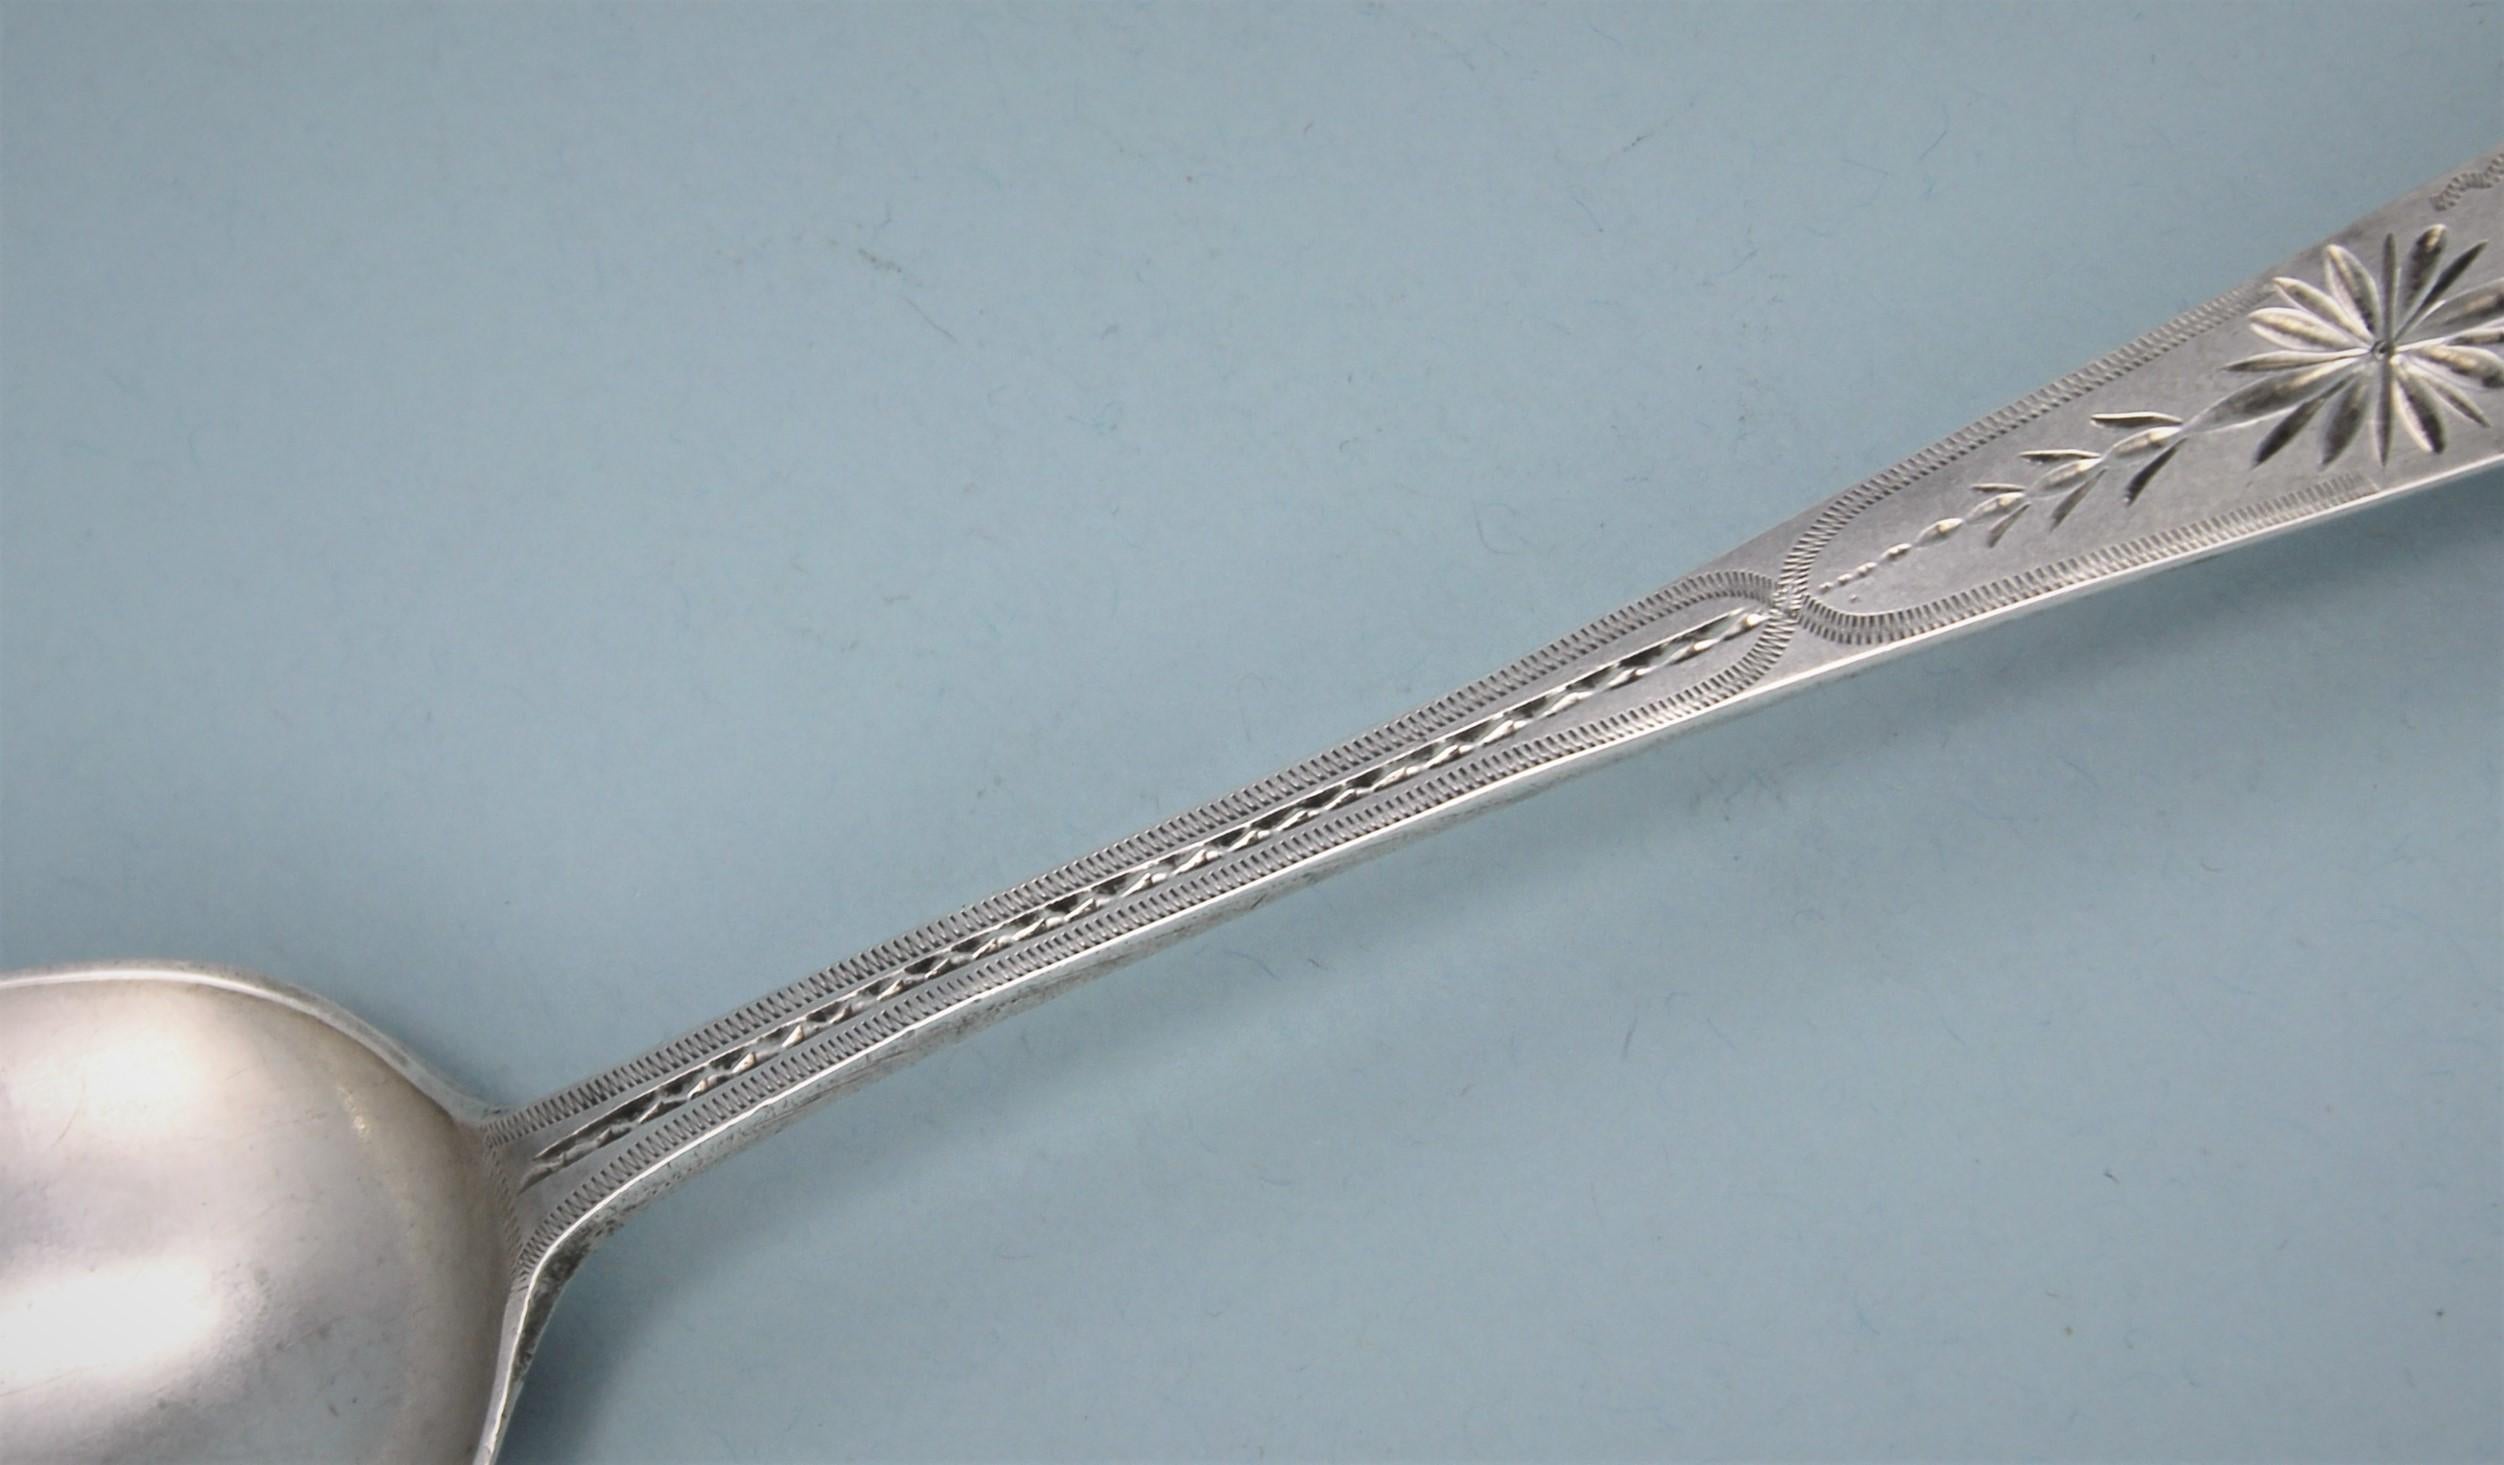 Very attractive George III sterling silver bright cut table spoon.
Maker: Richard Ferris. Exeter, 1794. 

The front of the stem is engraved with typically West Country bright cut engraving. The top of the stem has a bright cut escutcheon